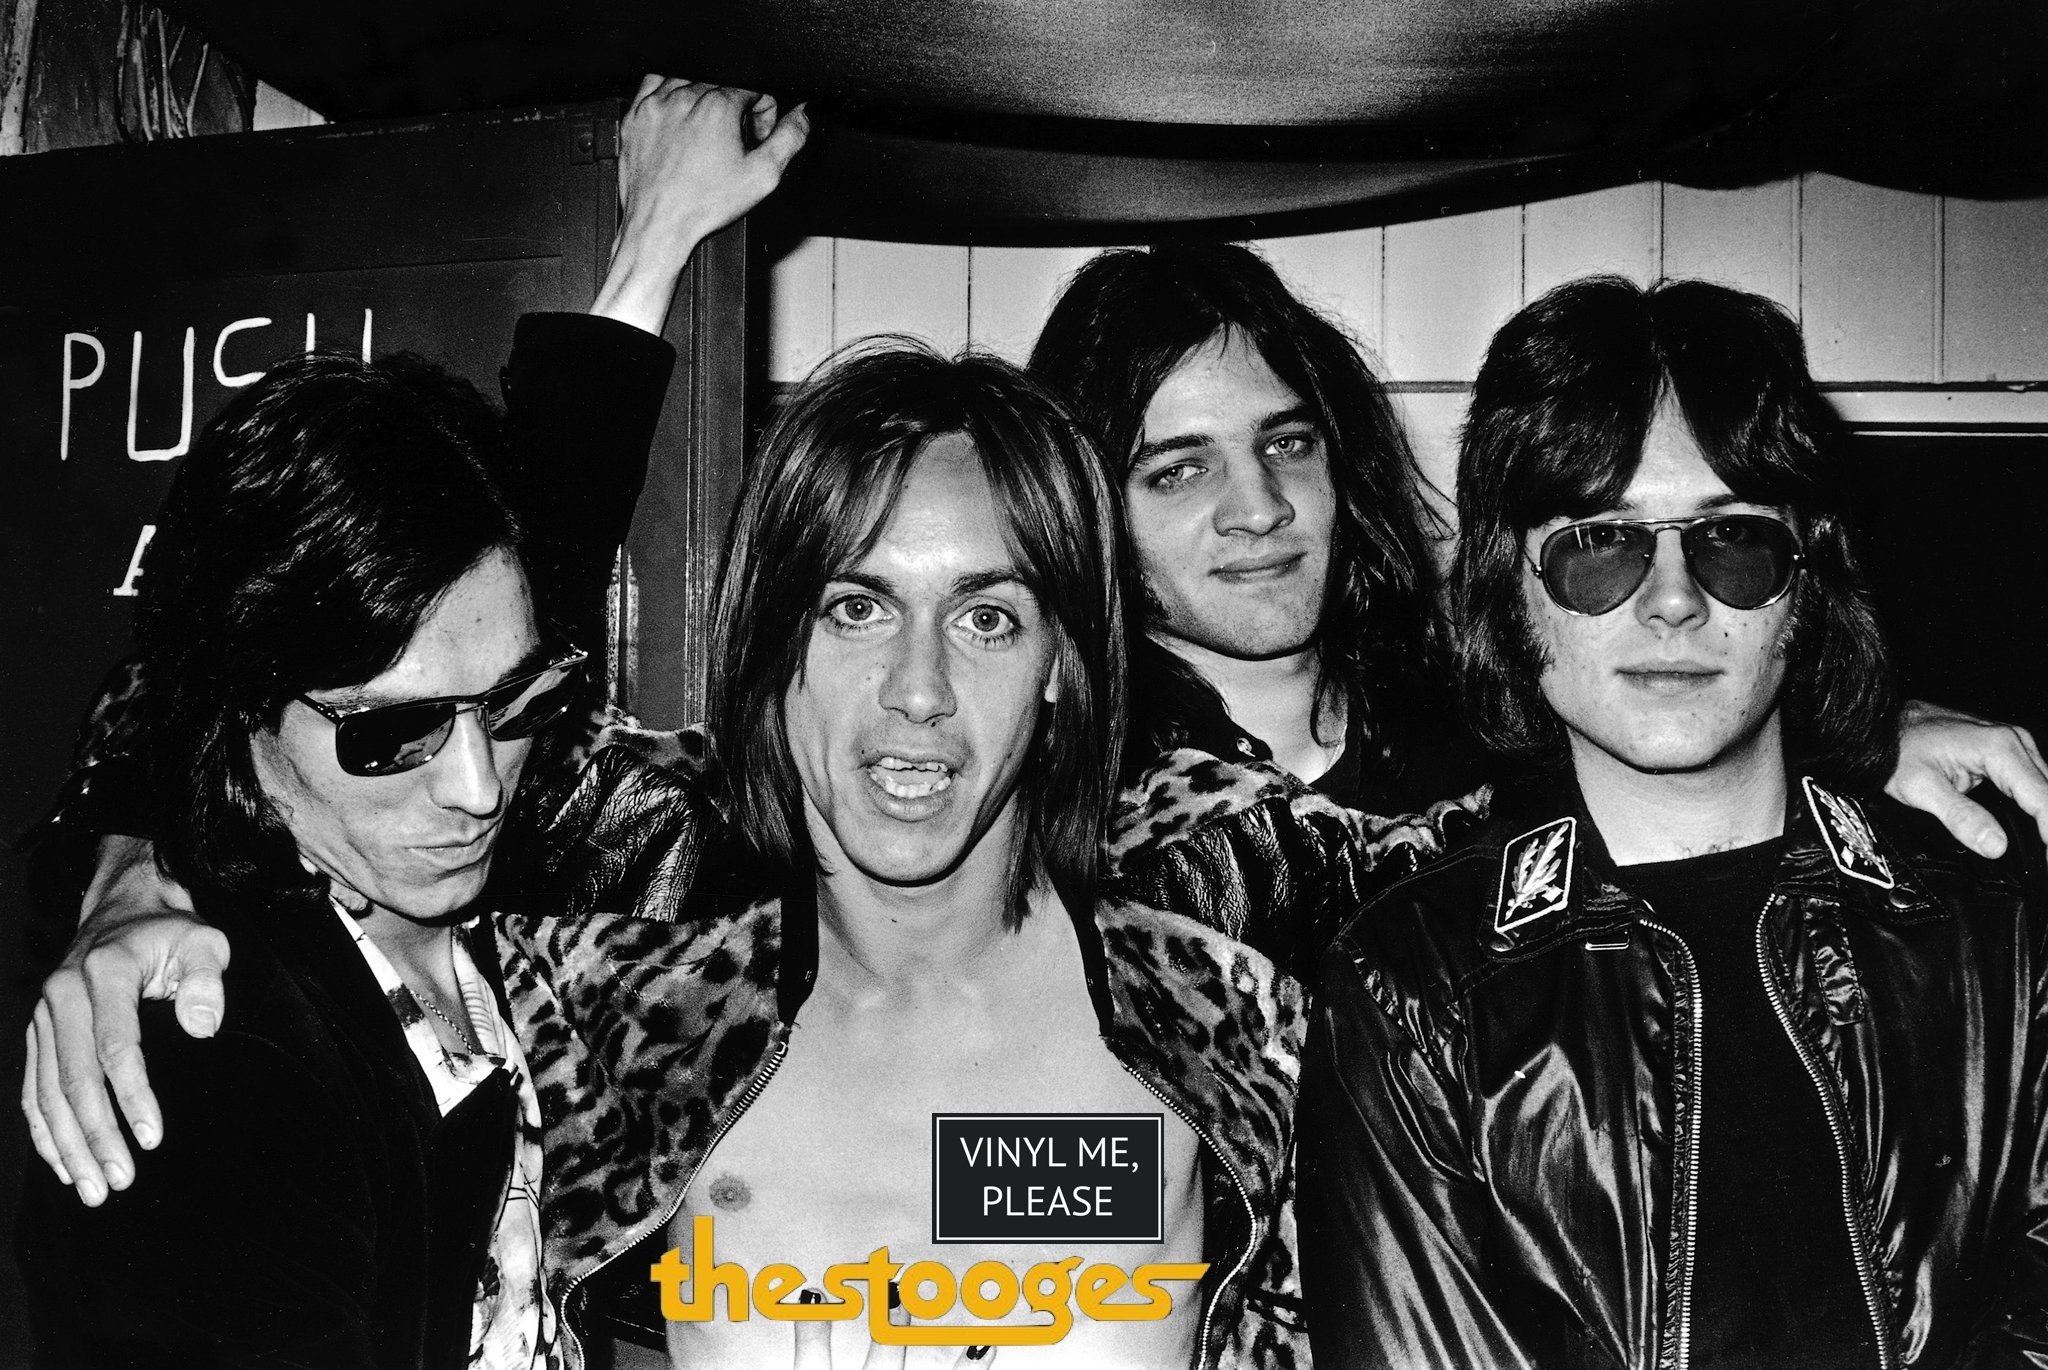 Geek insider, geekinsider, geekinsider. Com,, vinyl me, please april edition: the stooges - the stooges (john cale mix), entertainment